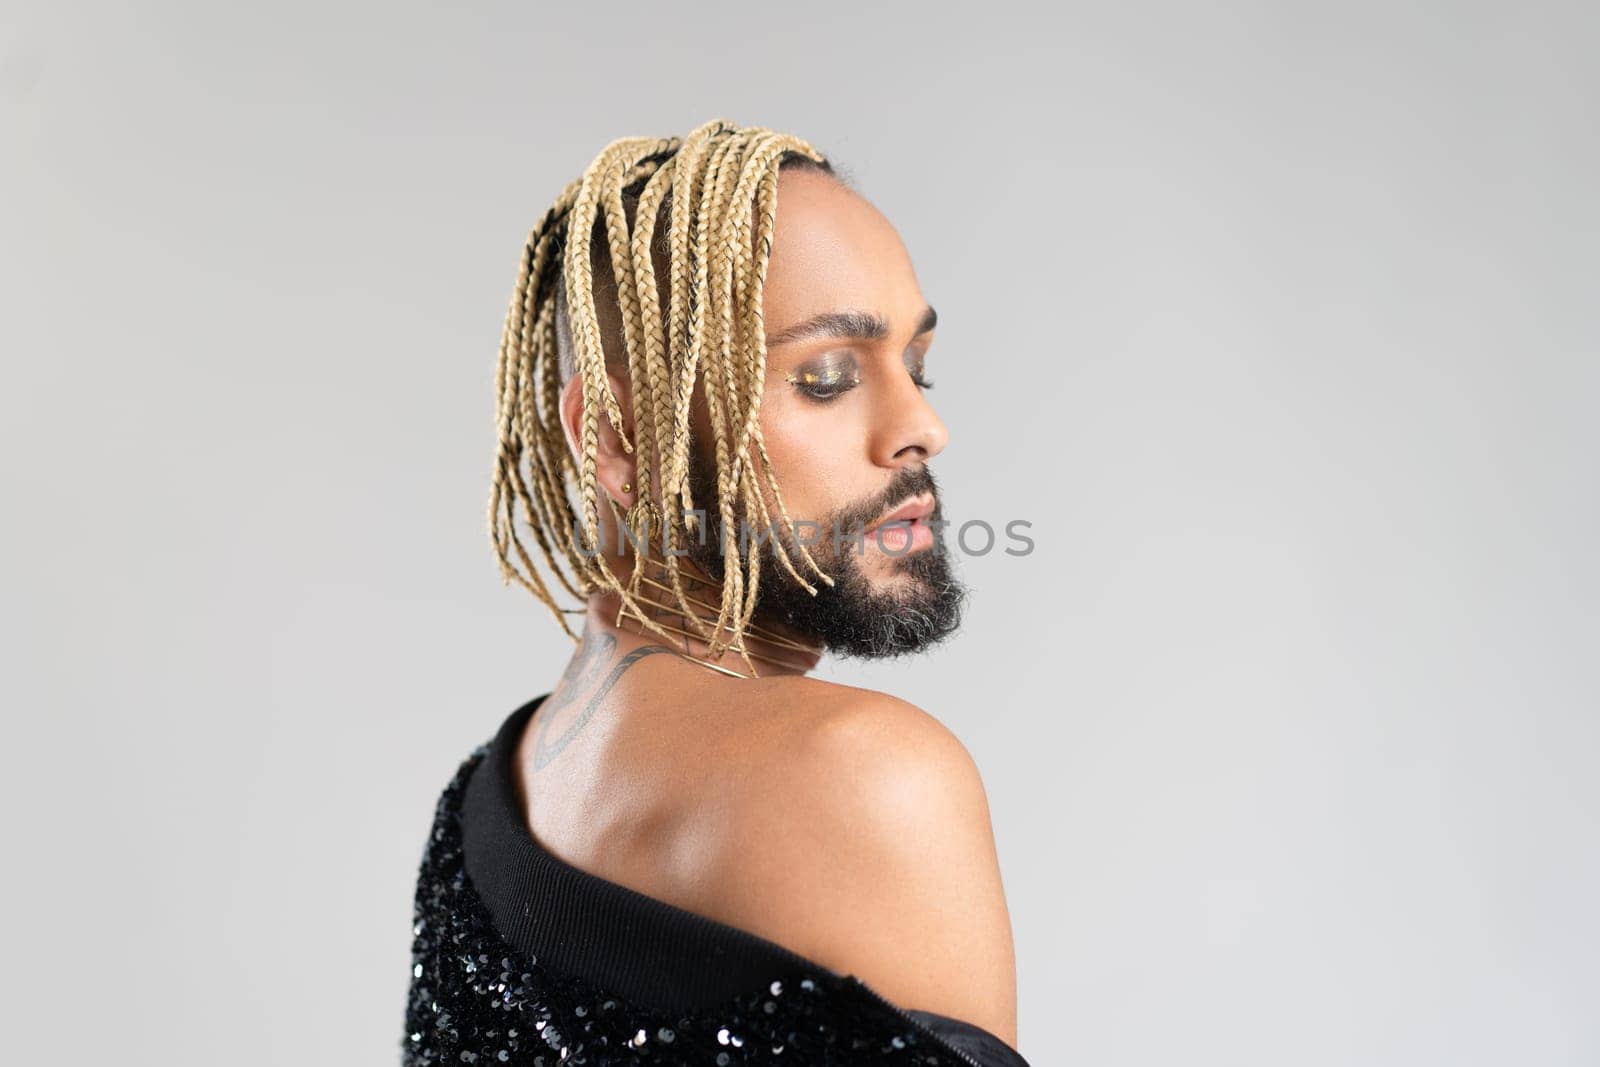 Afro-american homosexual male posing in photo studio on white background. Bearded gay with beard and make up close up portrait